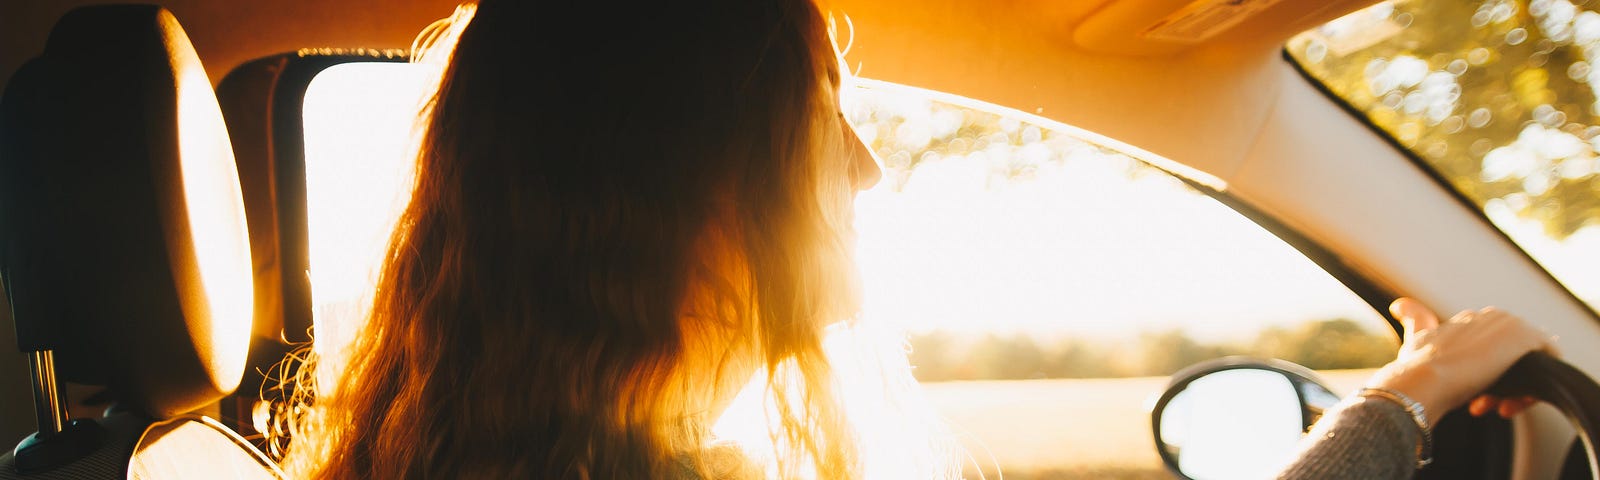 Golden light framing a long haired girl at the wheel of a car